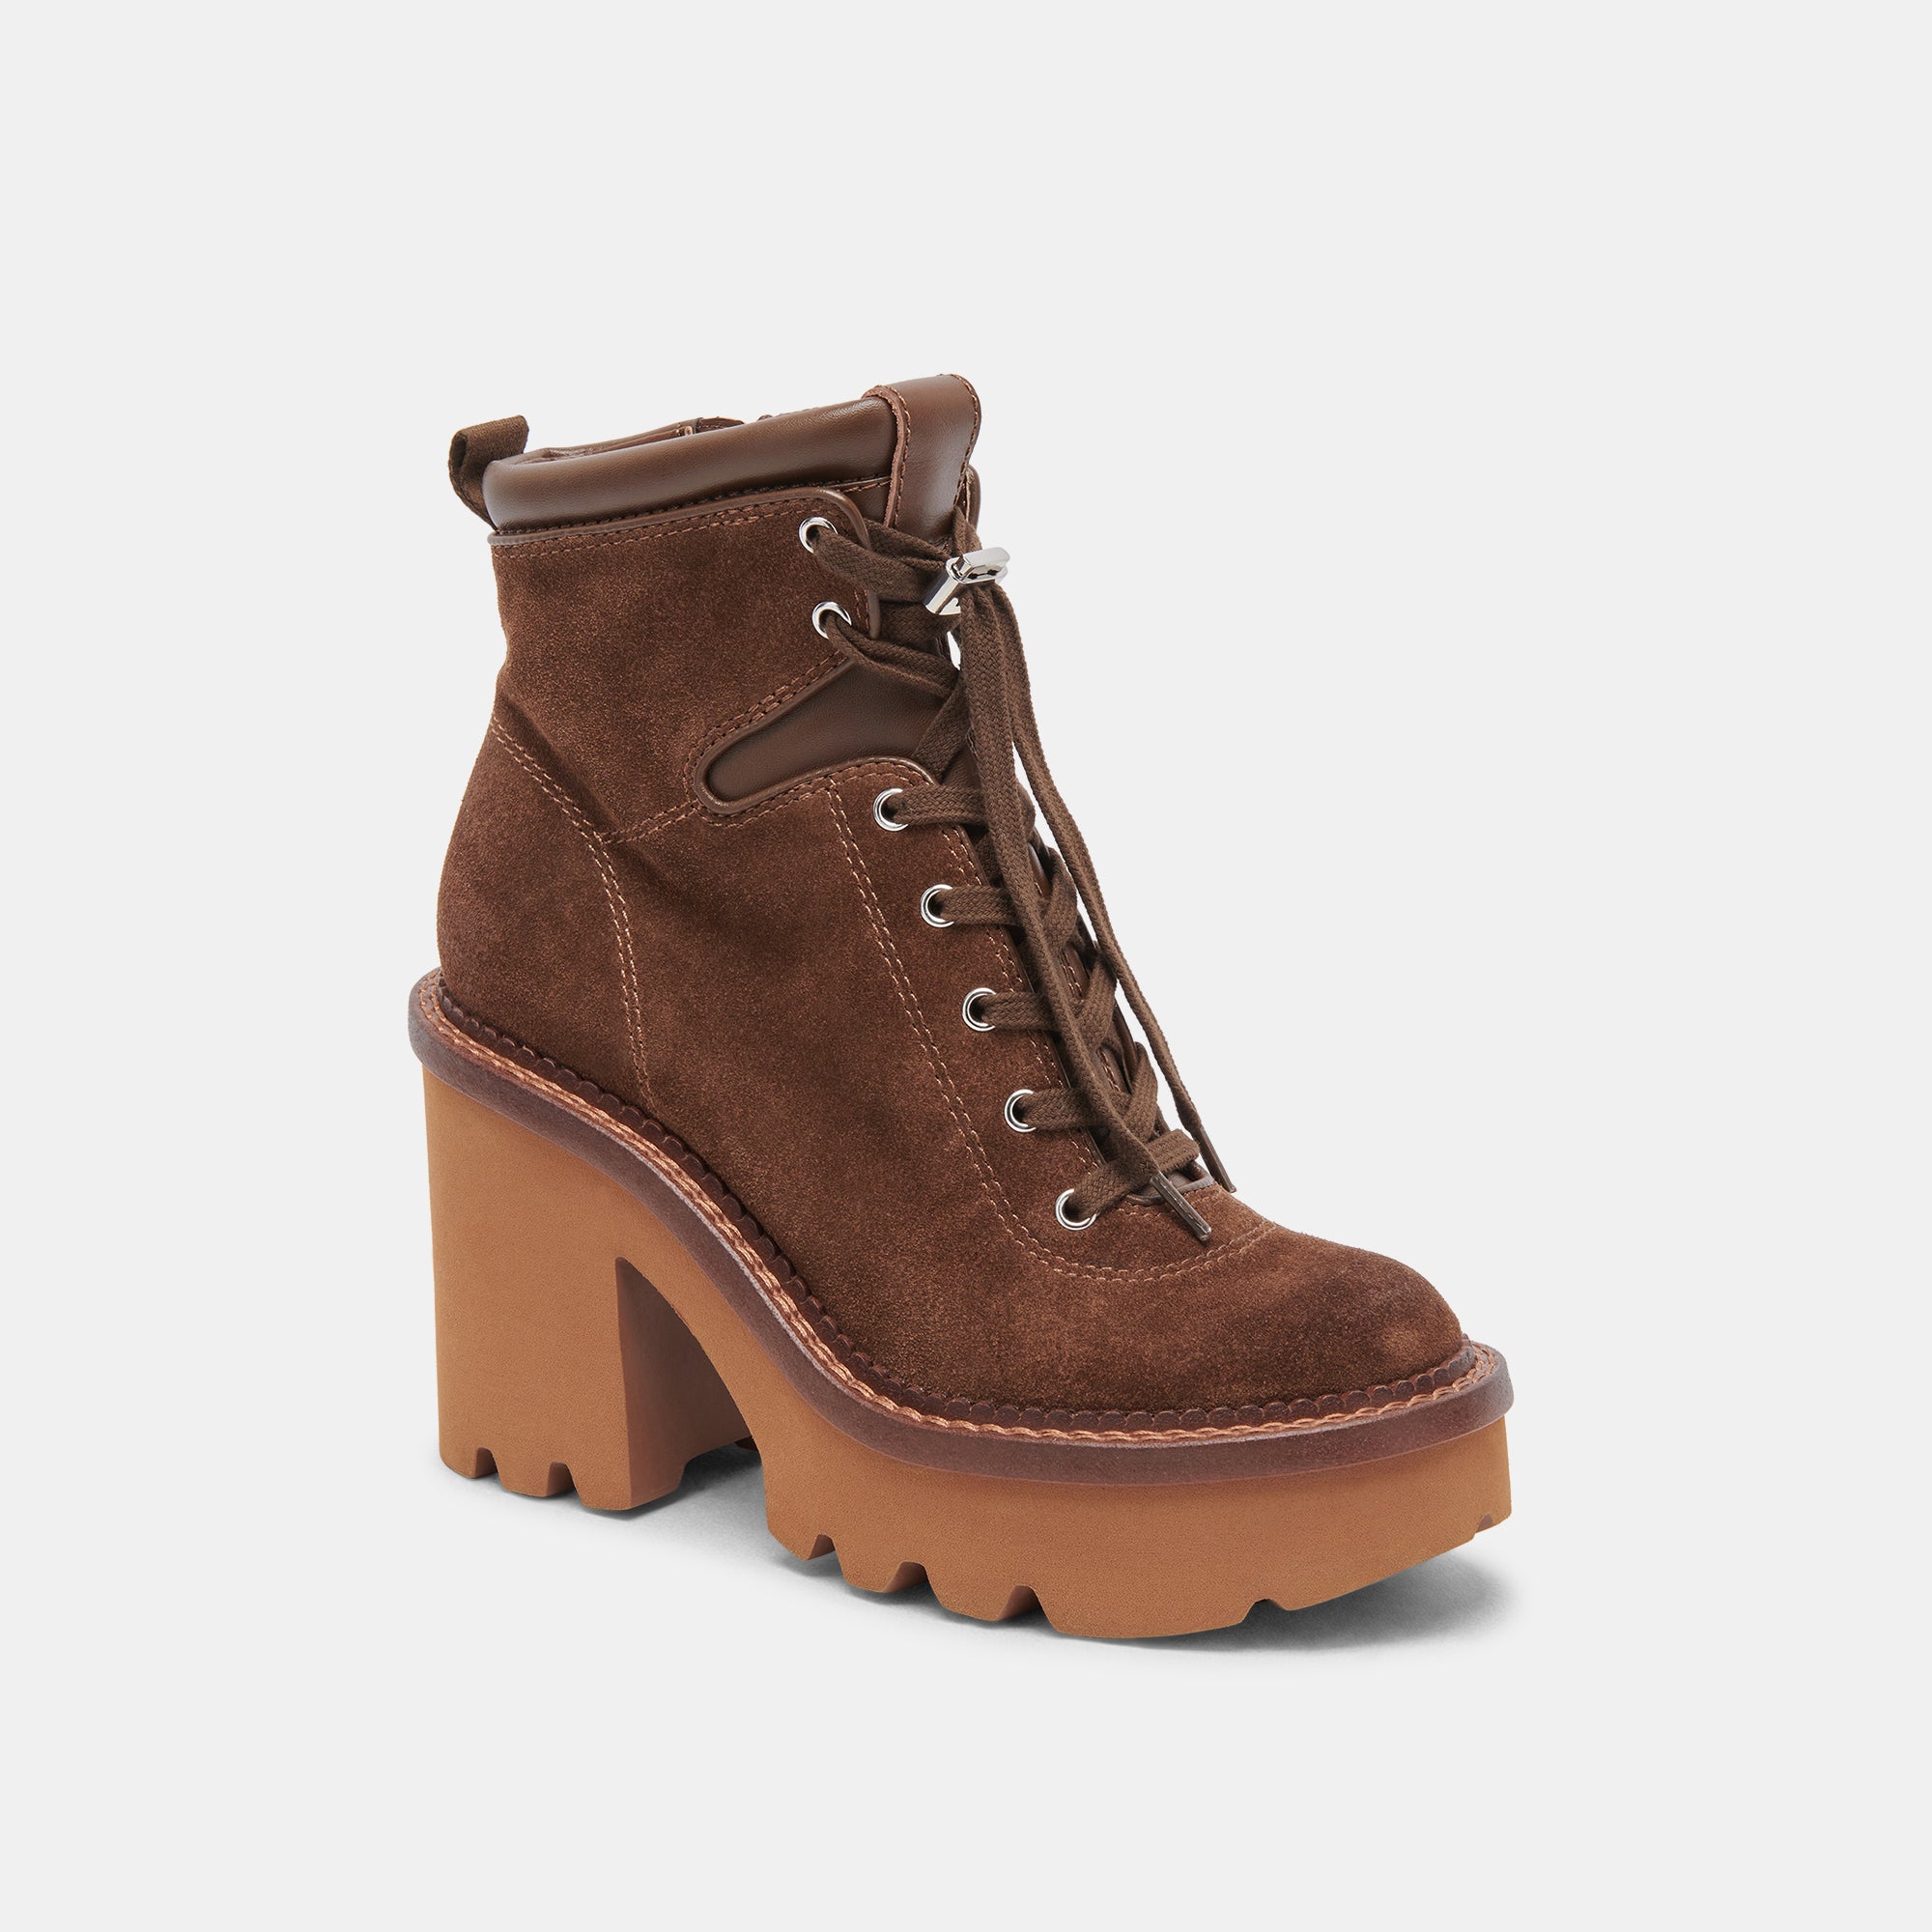 Dommie Boots Cocoa Suede | Cocoa Suede Winter Platform Boots